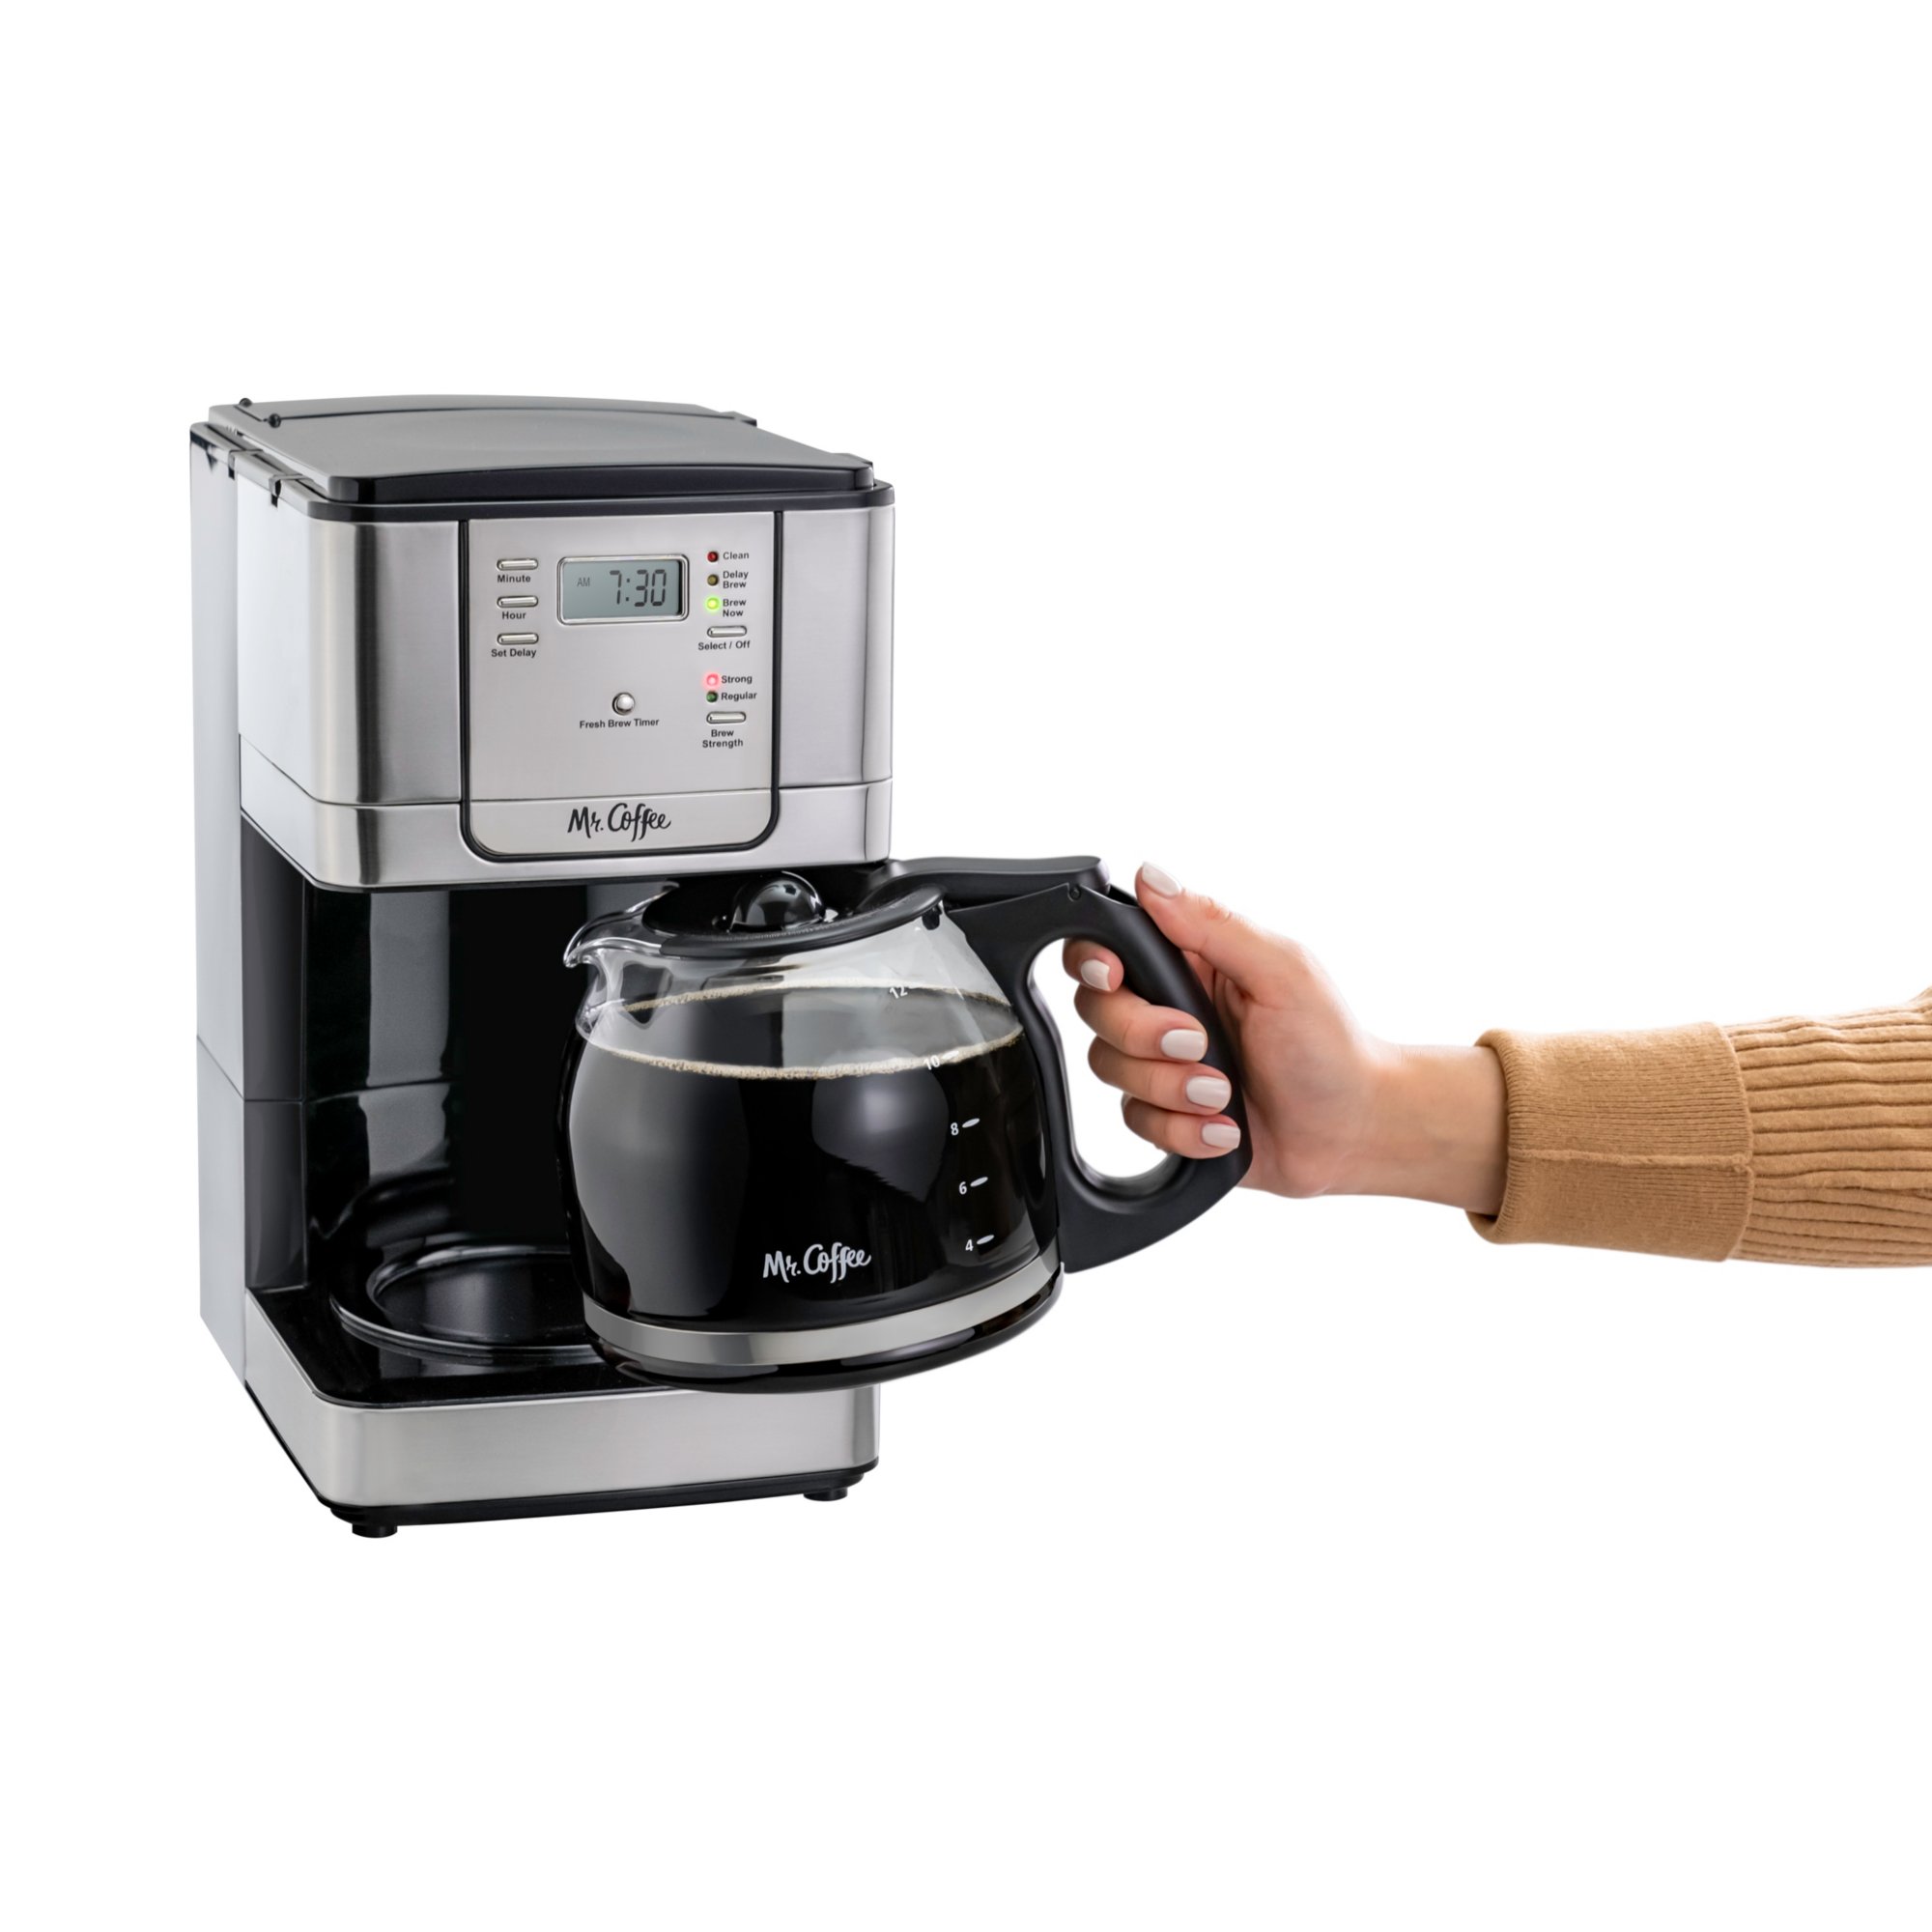 Mr. Coffee 12 Cup Programmable Coffee Maker, Strong Brew Selector, Black